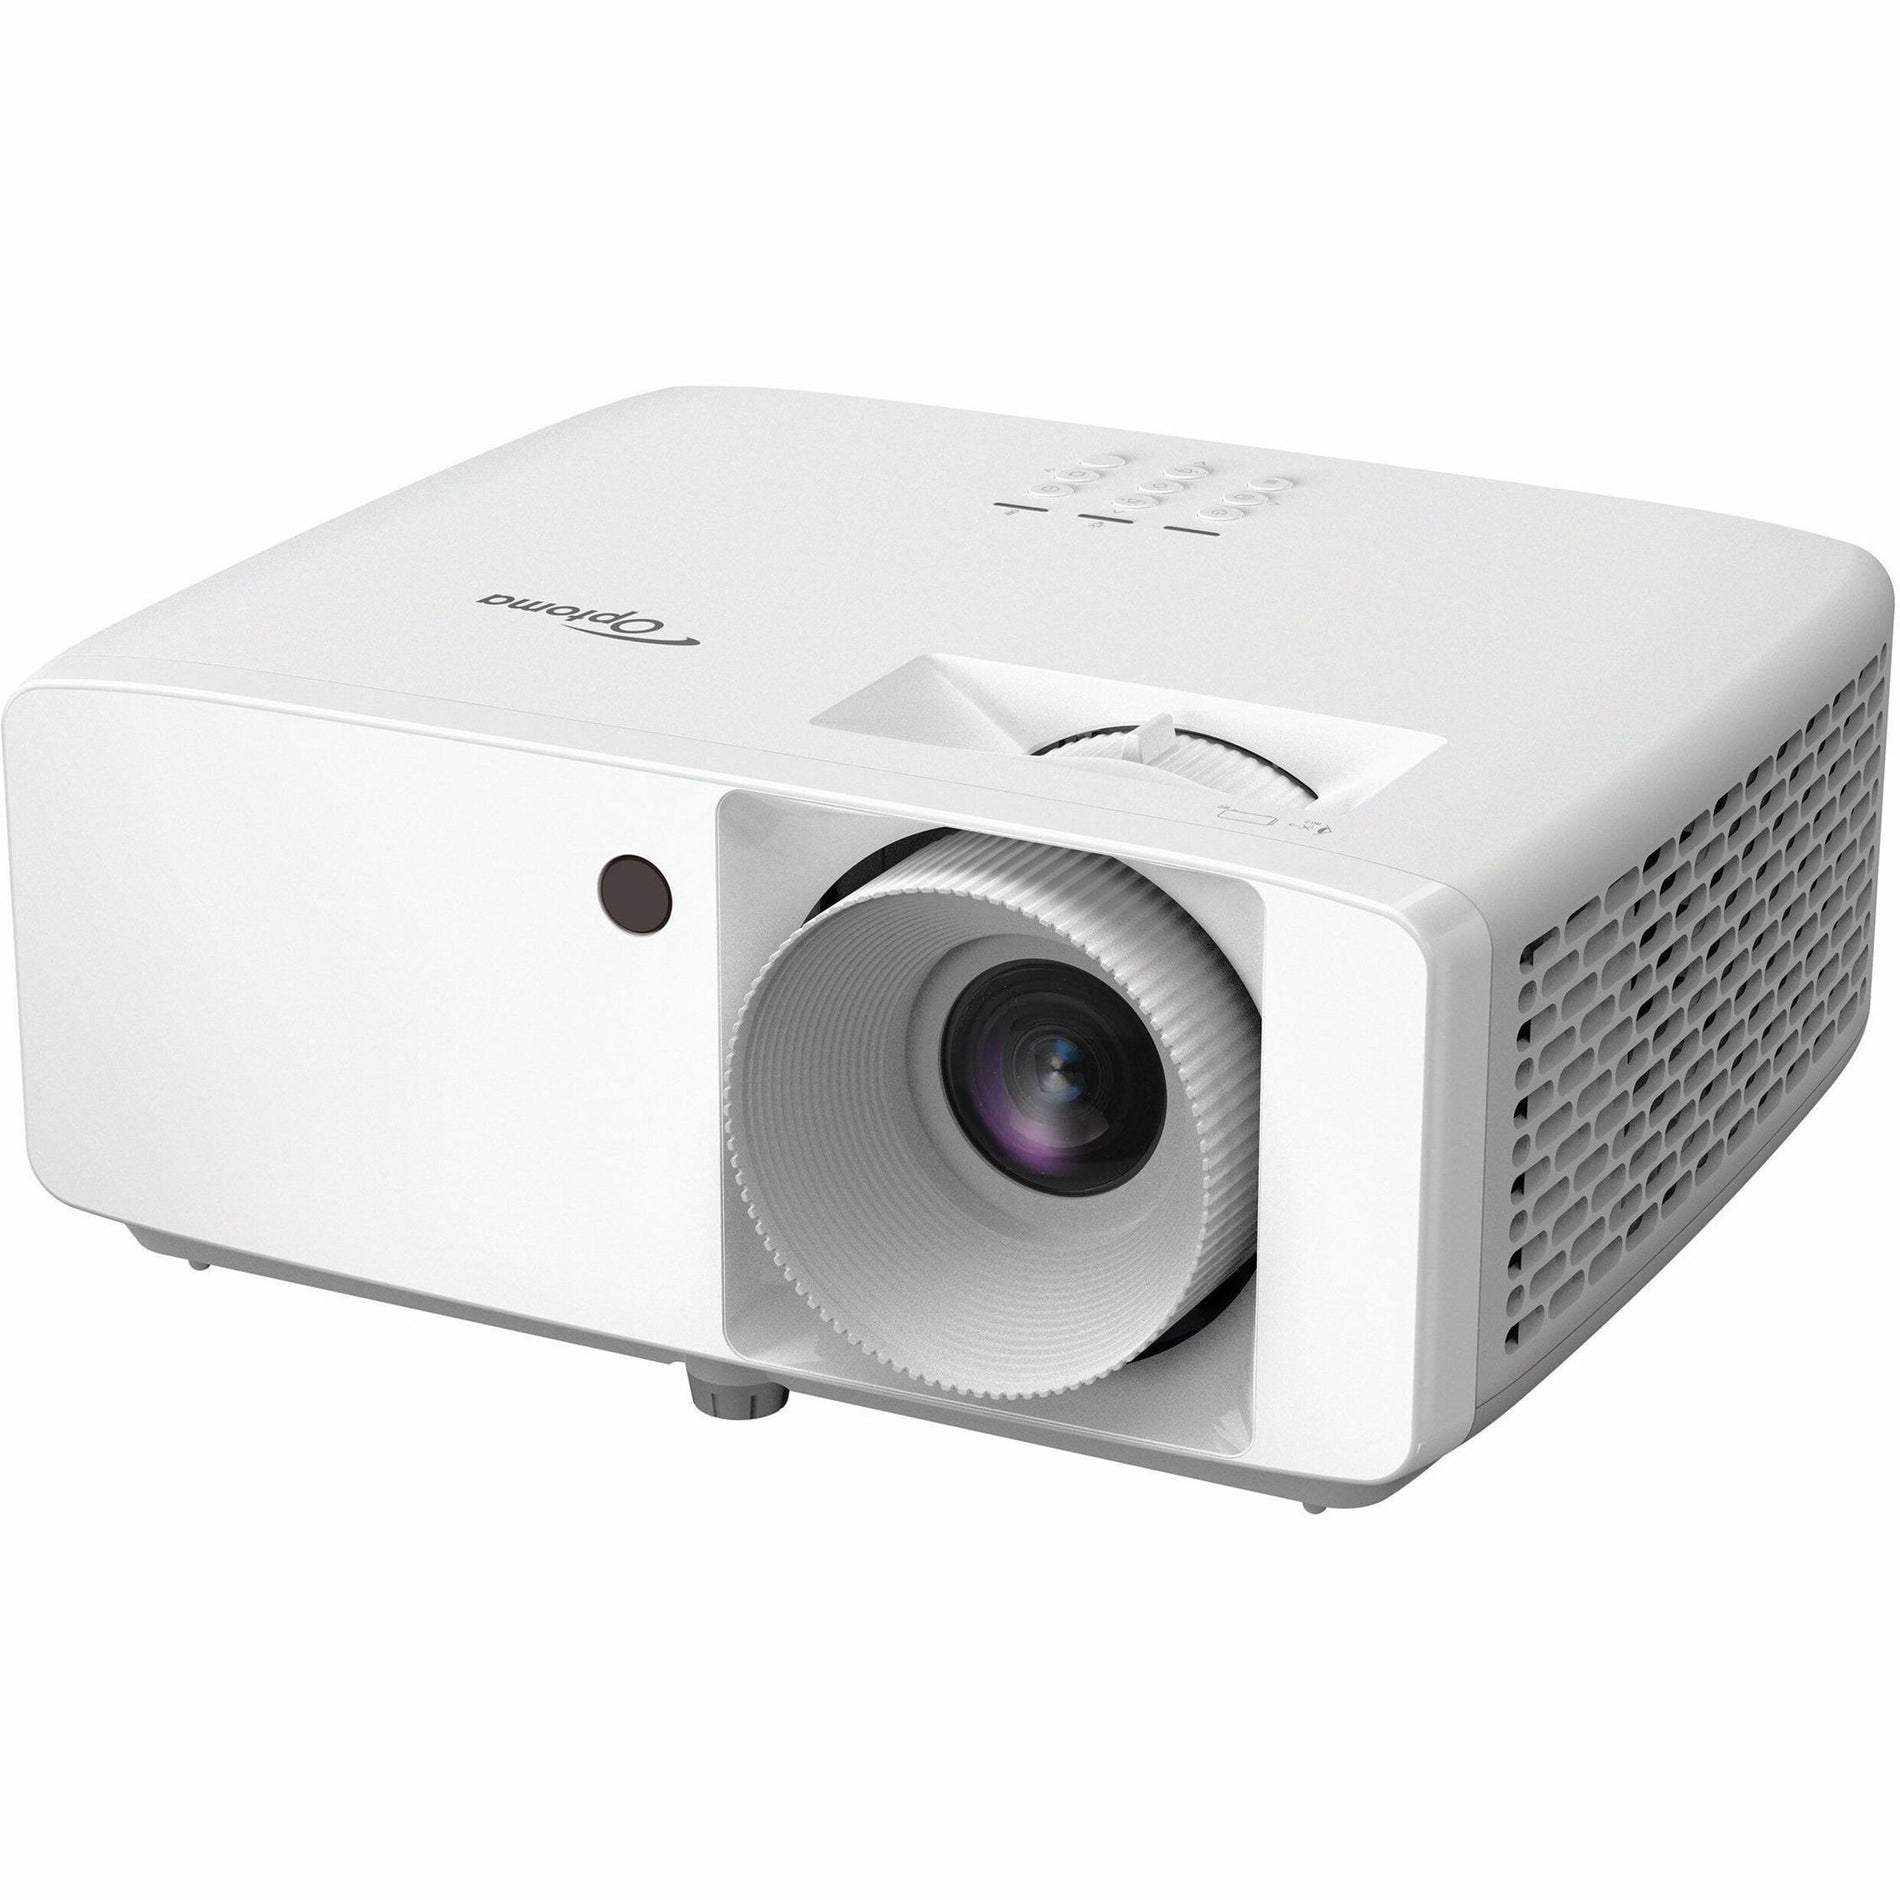 Optoma 4000 lumen 1080p HDR DuraCore Laser DLP projector (HZ40HDR)